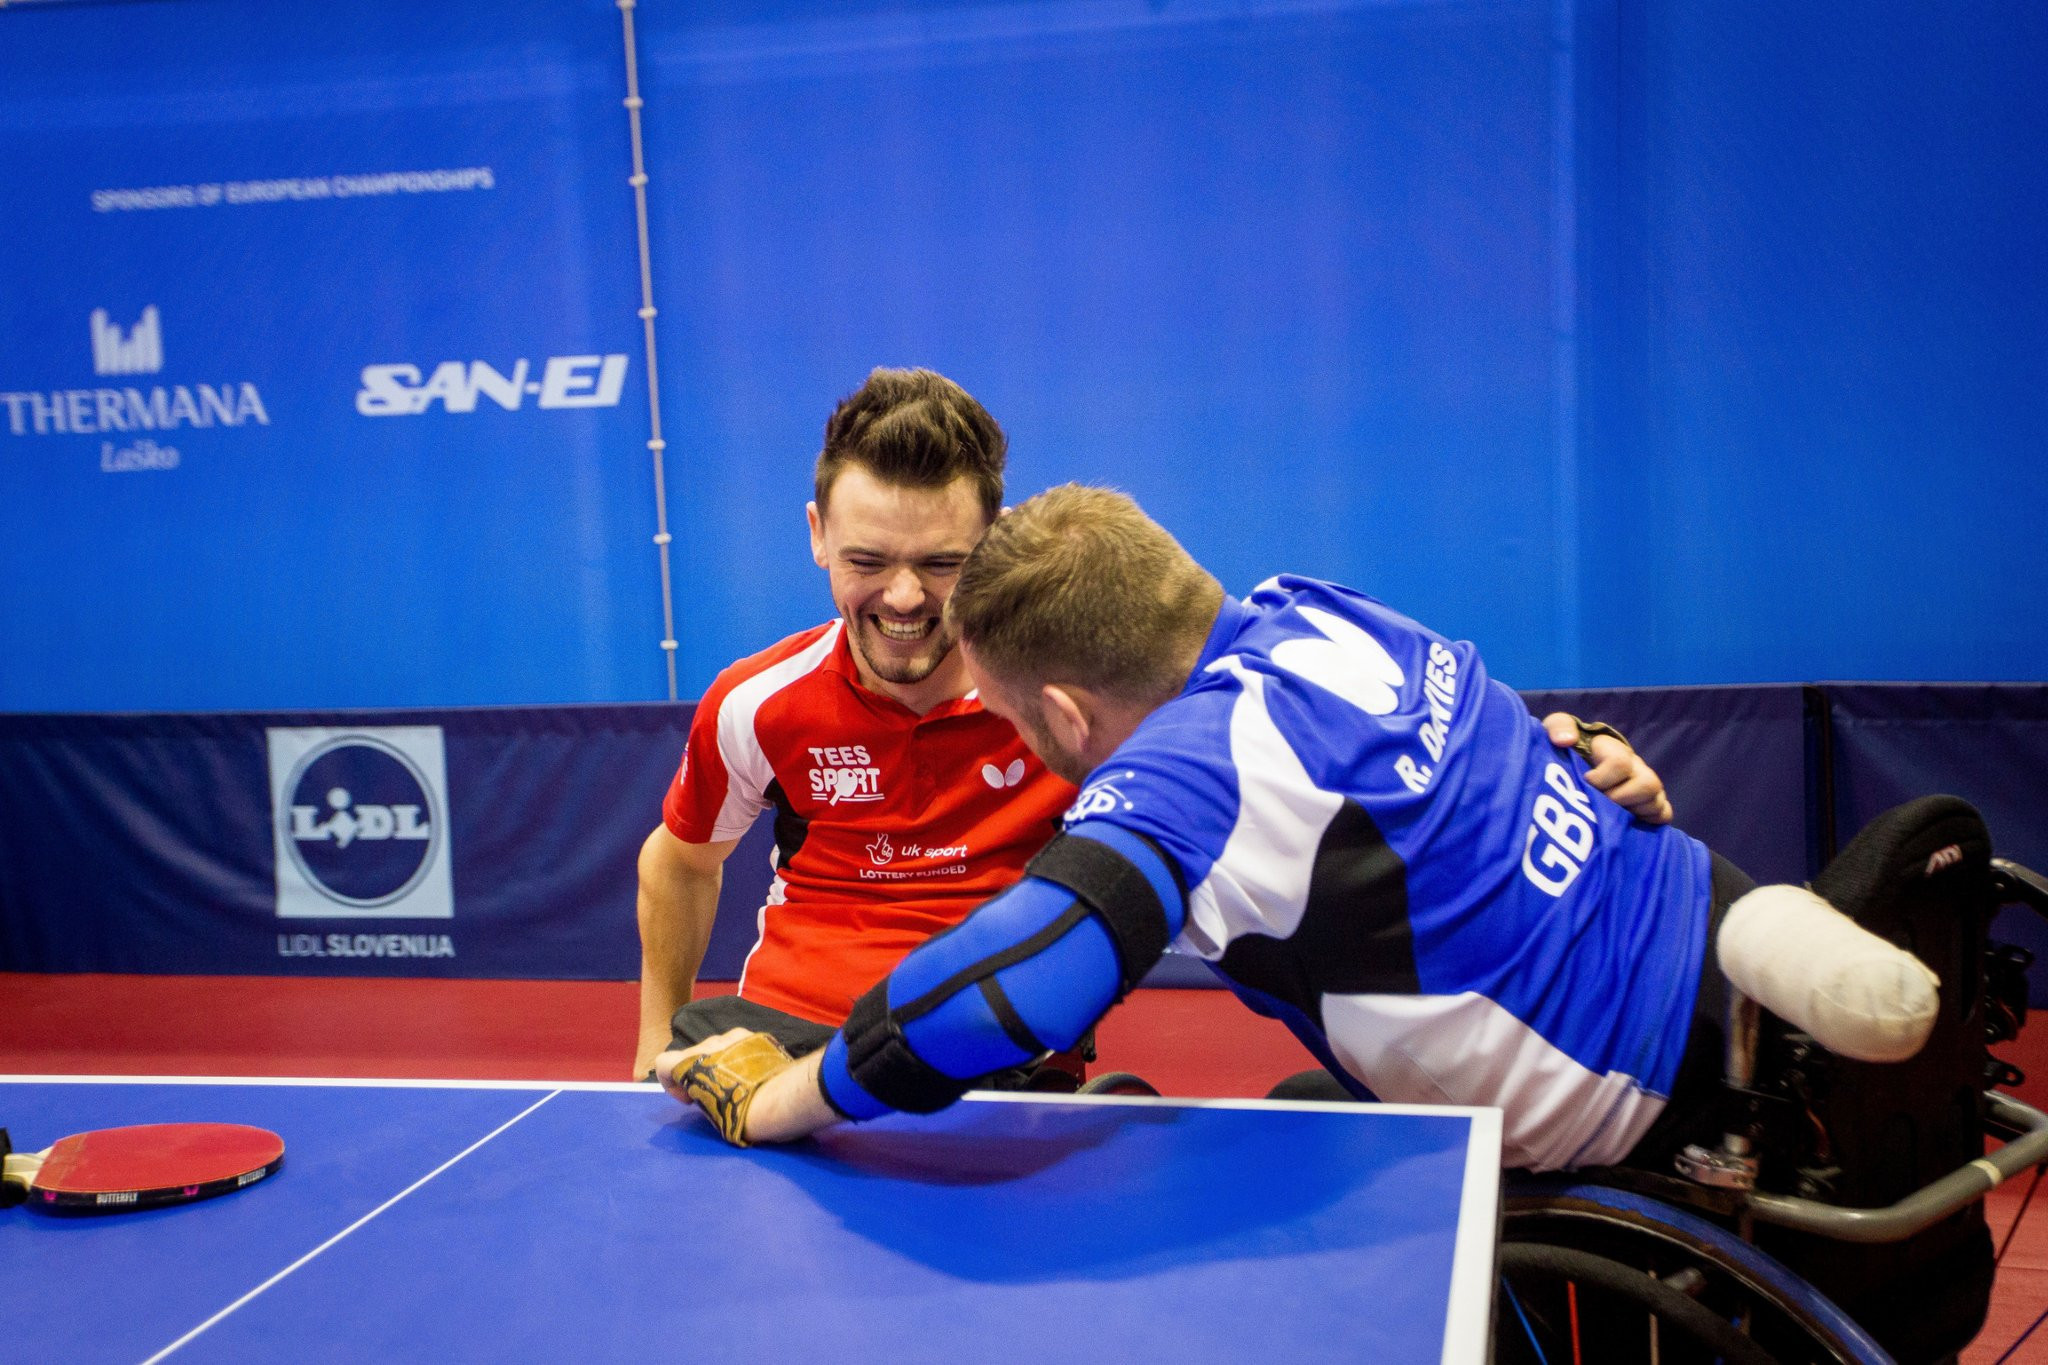 Rio 2016 Paralympic champion Rob Davies retained his men’s class one singles title today ©GB Para Table Tennis / Twitter